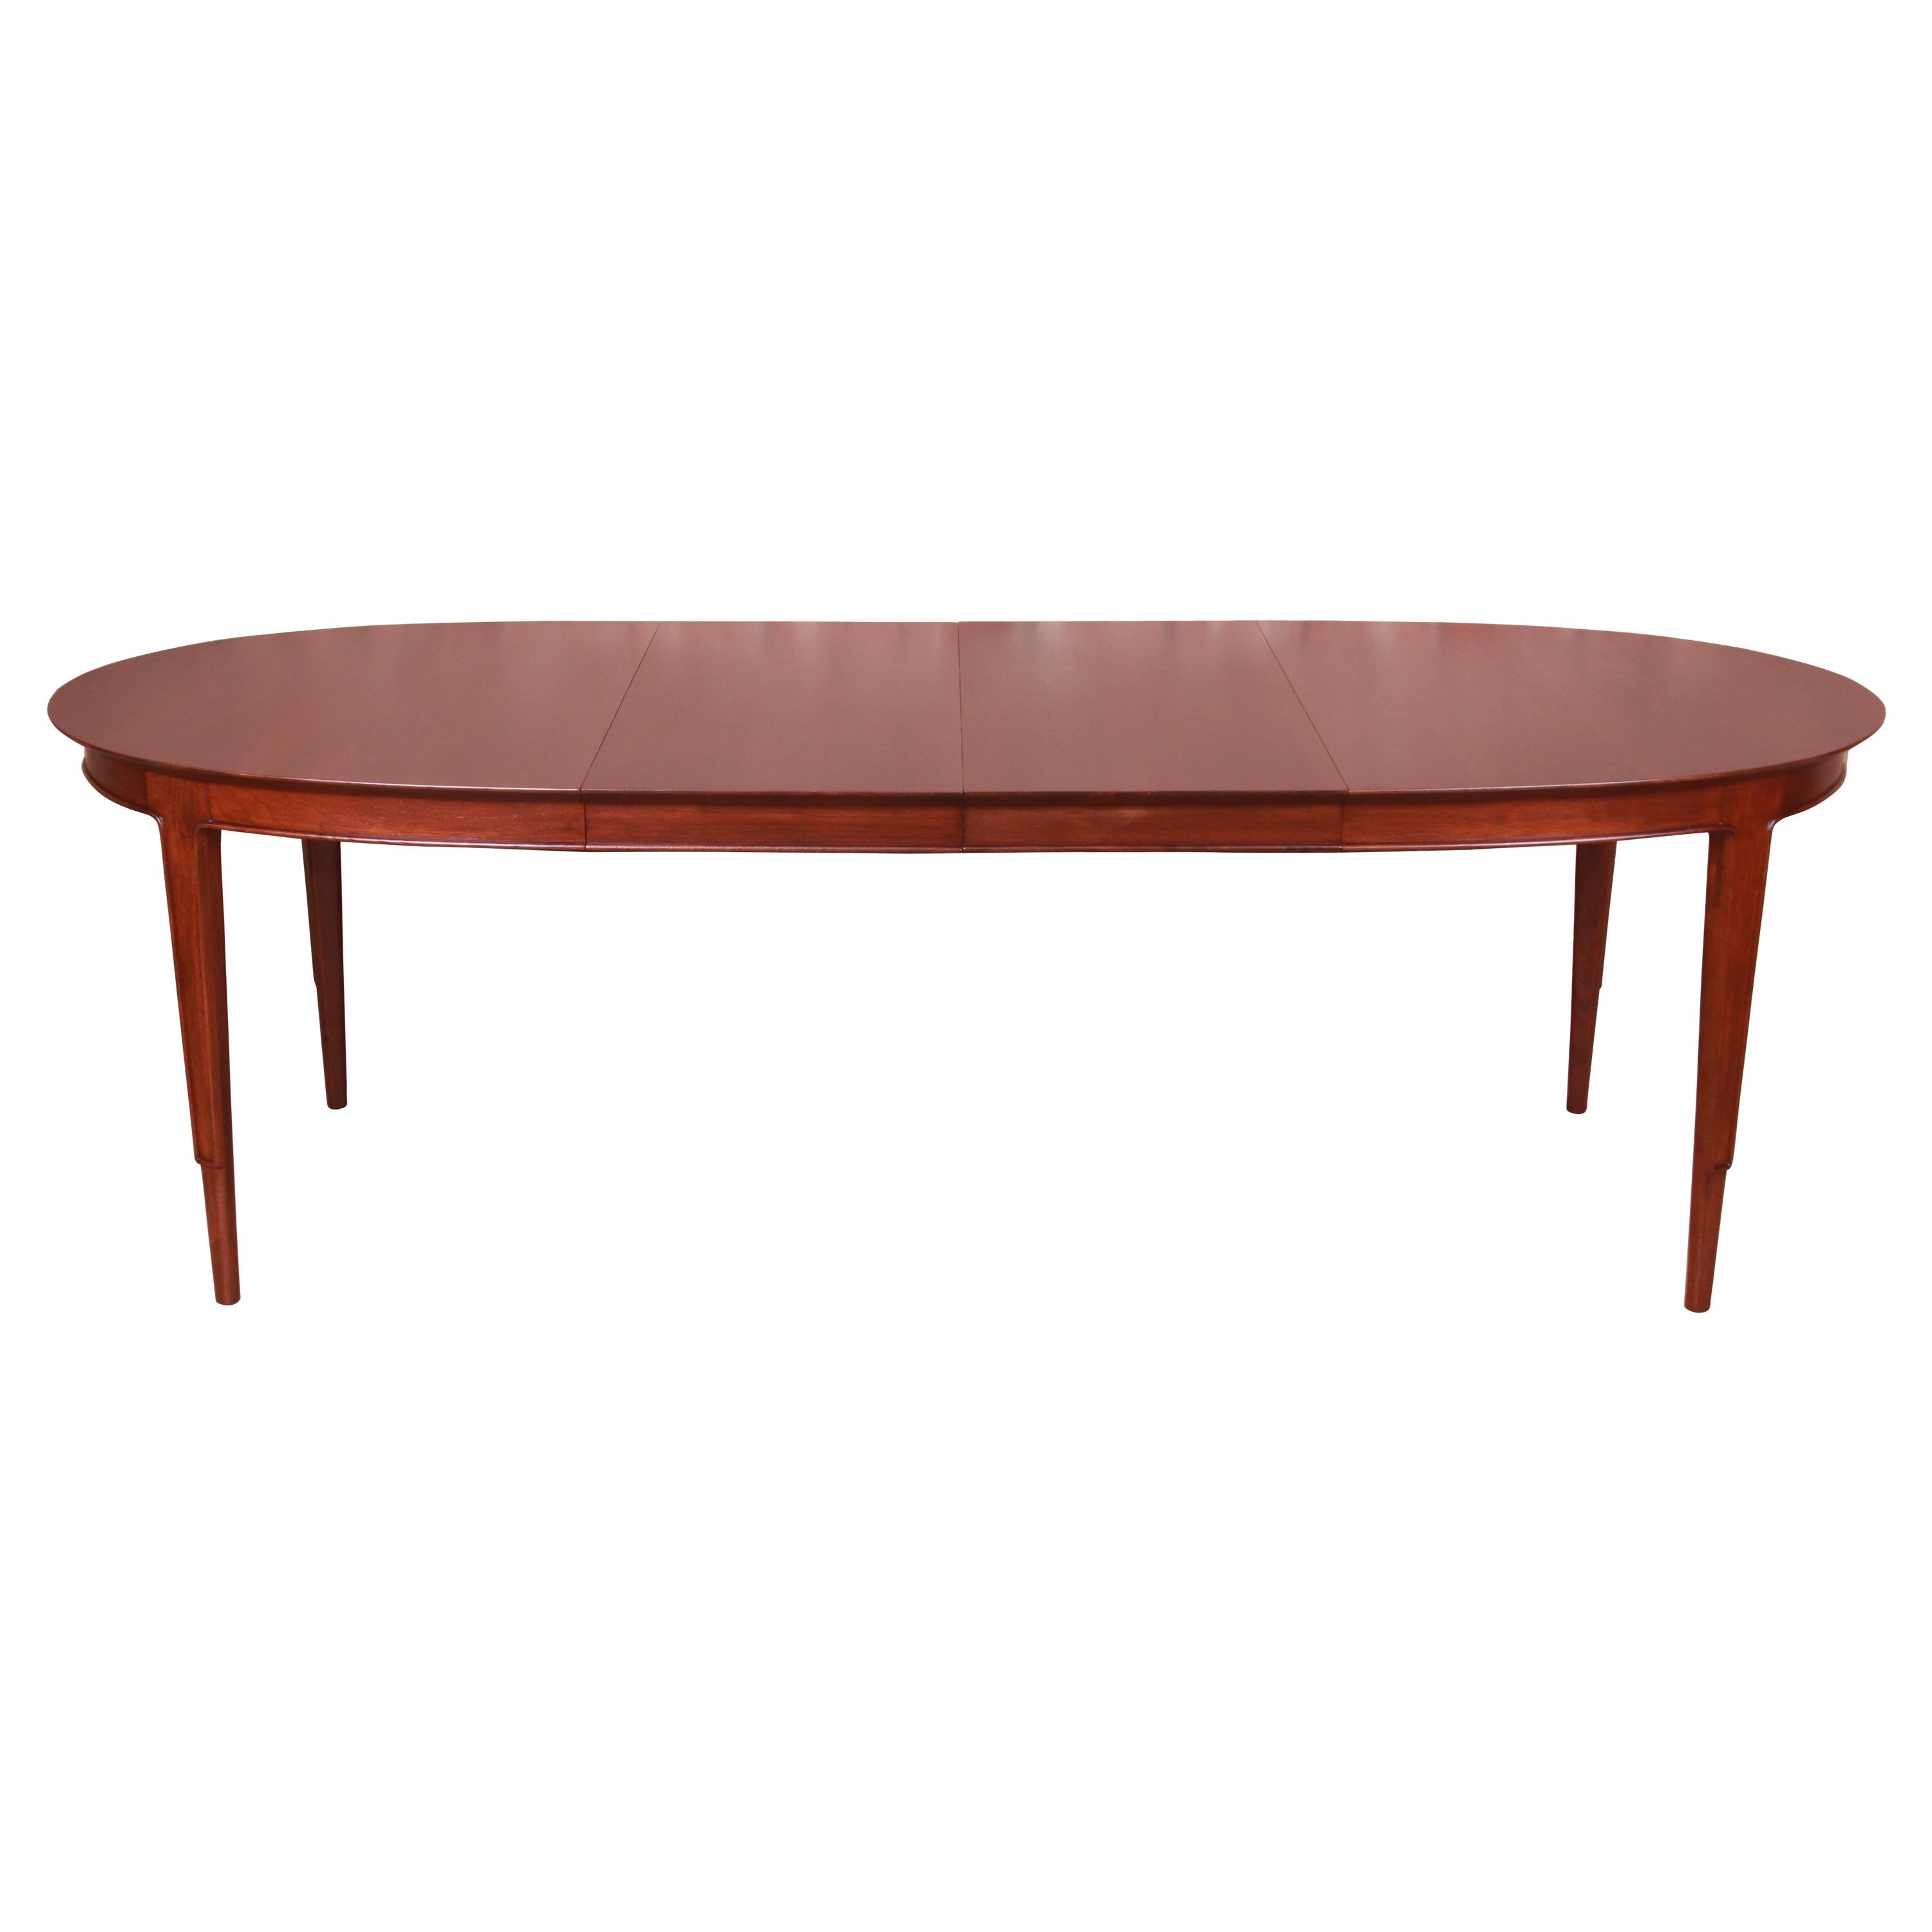 John Stuart Janus Collection Sculpted Walnut Dining Table, Newly Refinished